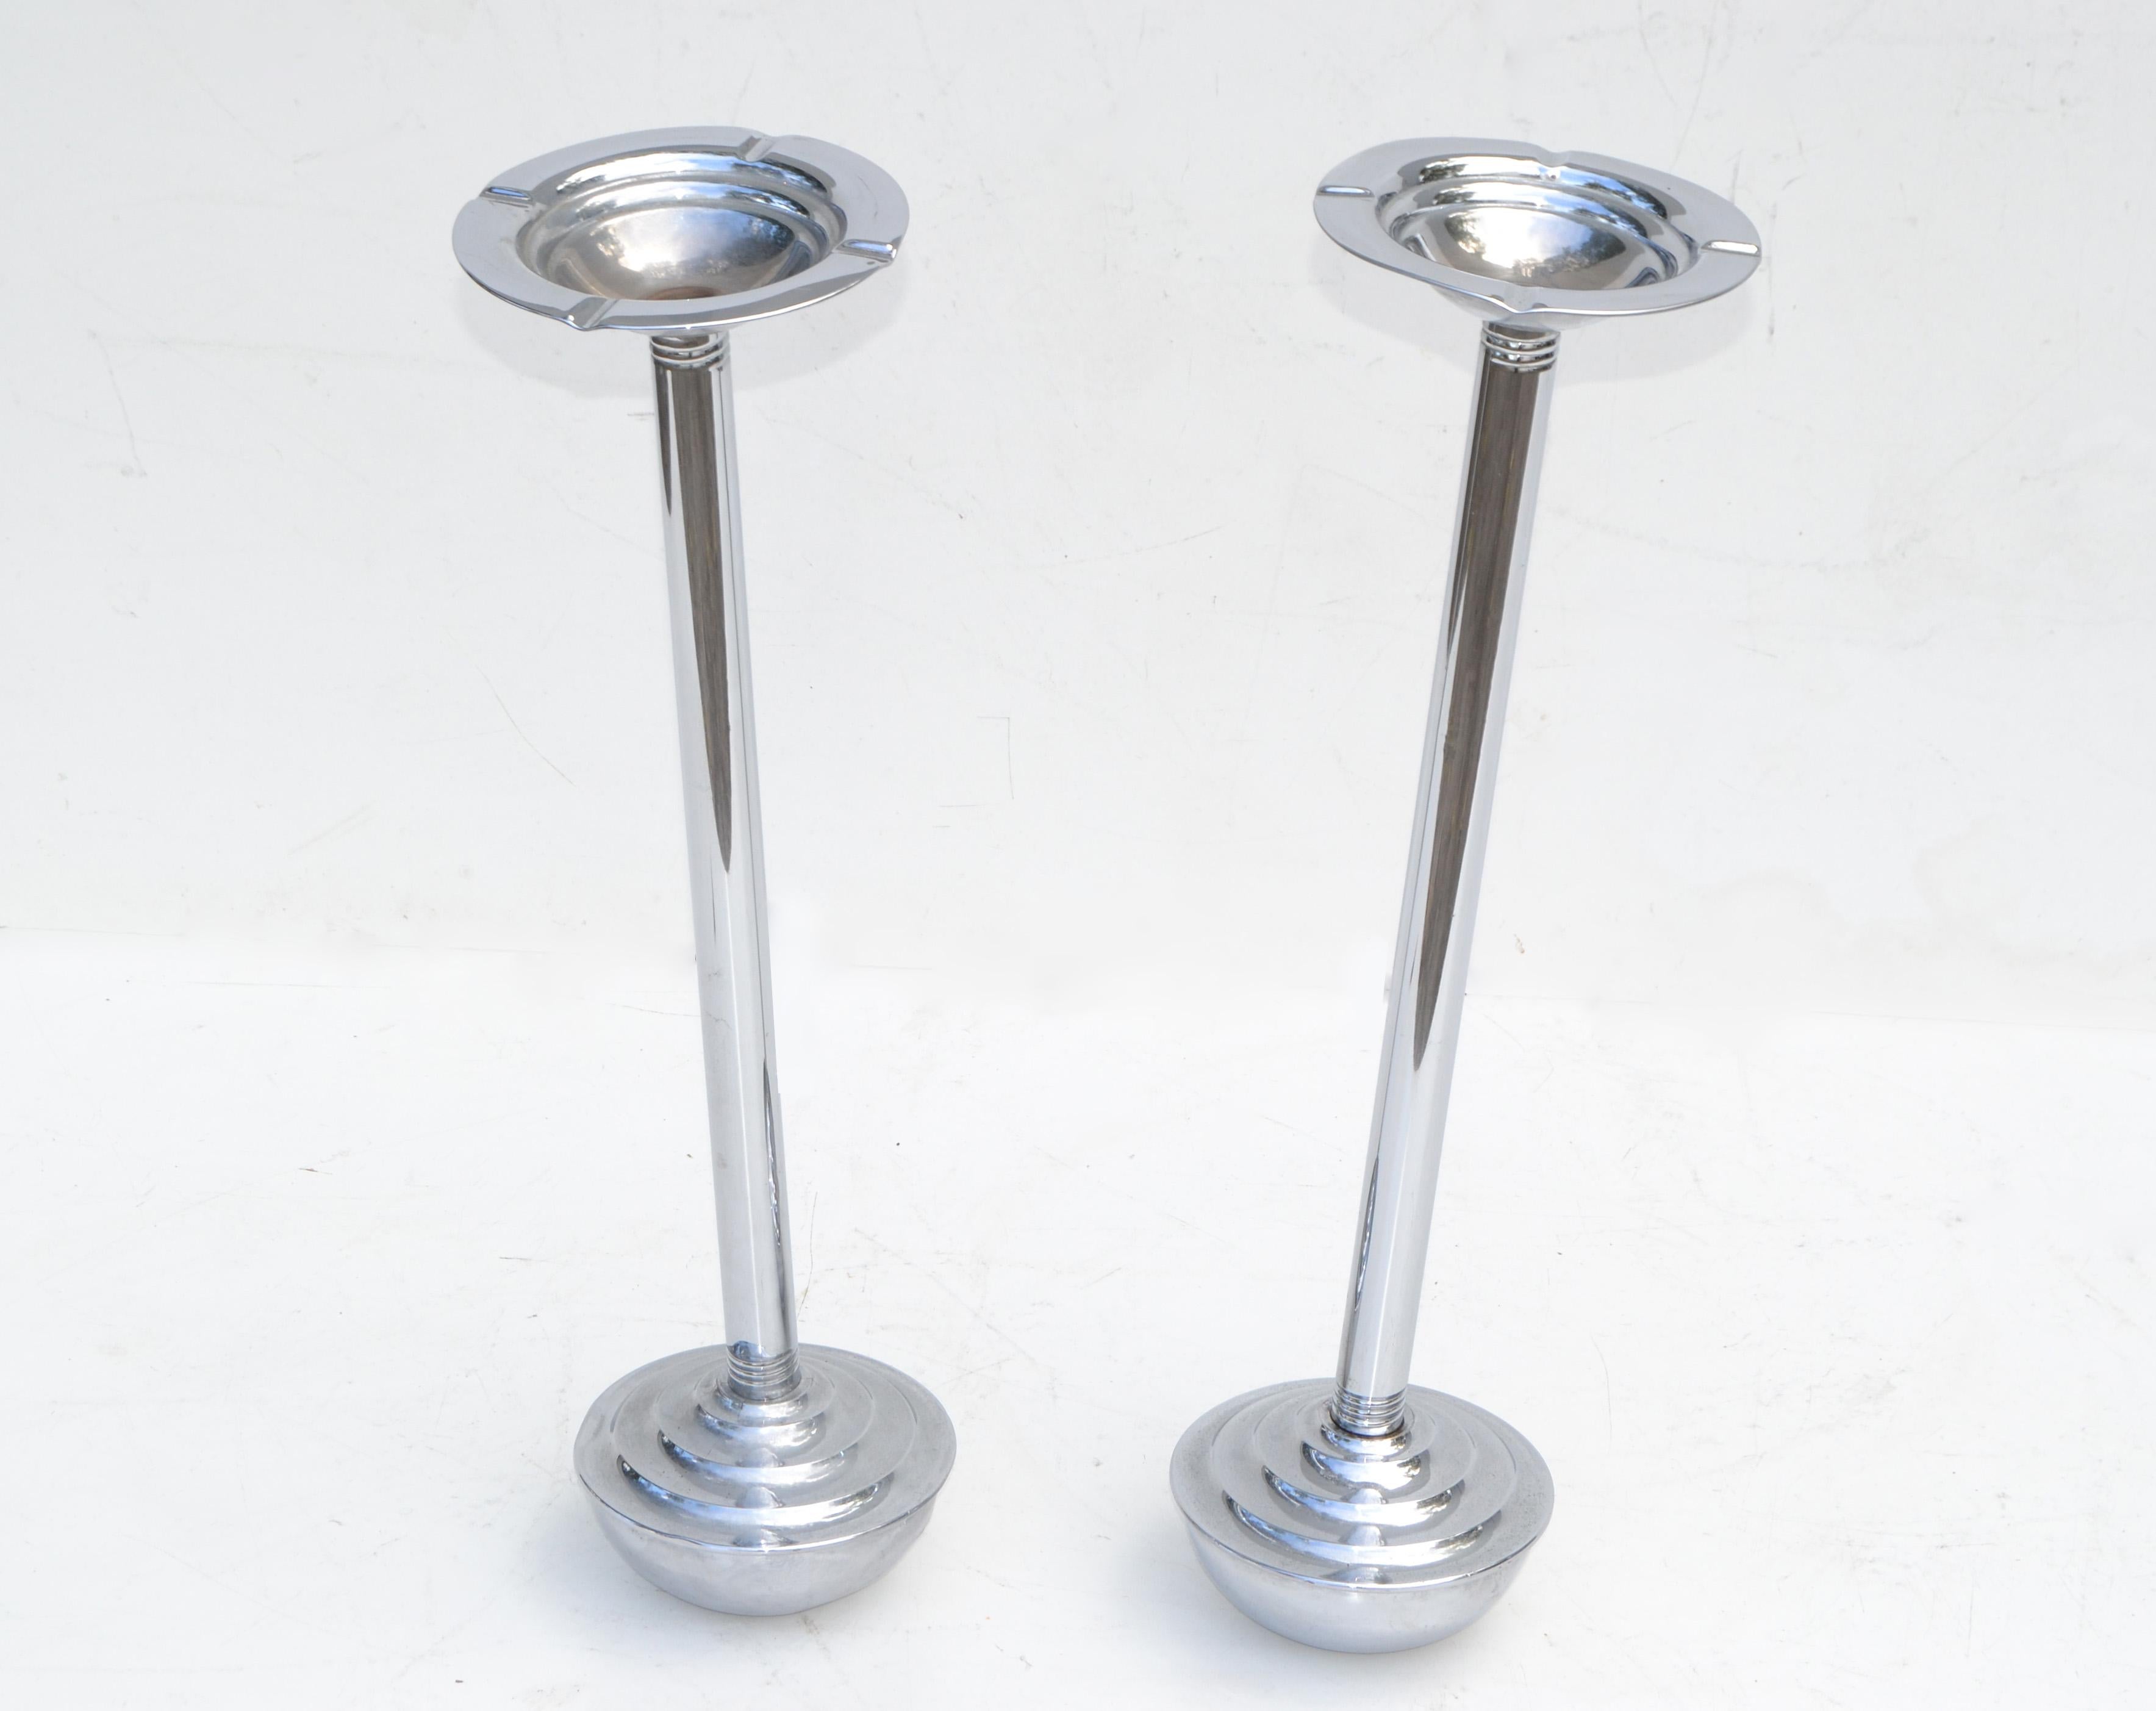 We offer two of Art Deco ashtray stands on heavy round base in chrome and metal.
Due to age and use they show wear and dents, but both are functional.
Priced per item.
Two available for $1200.